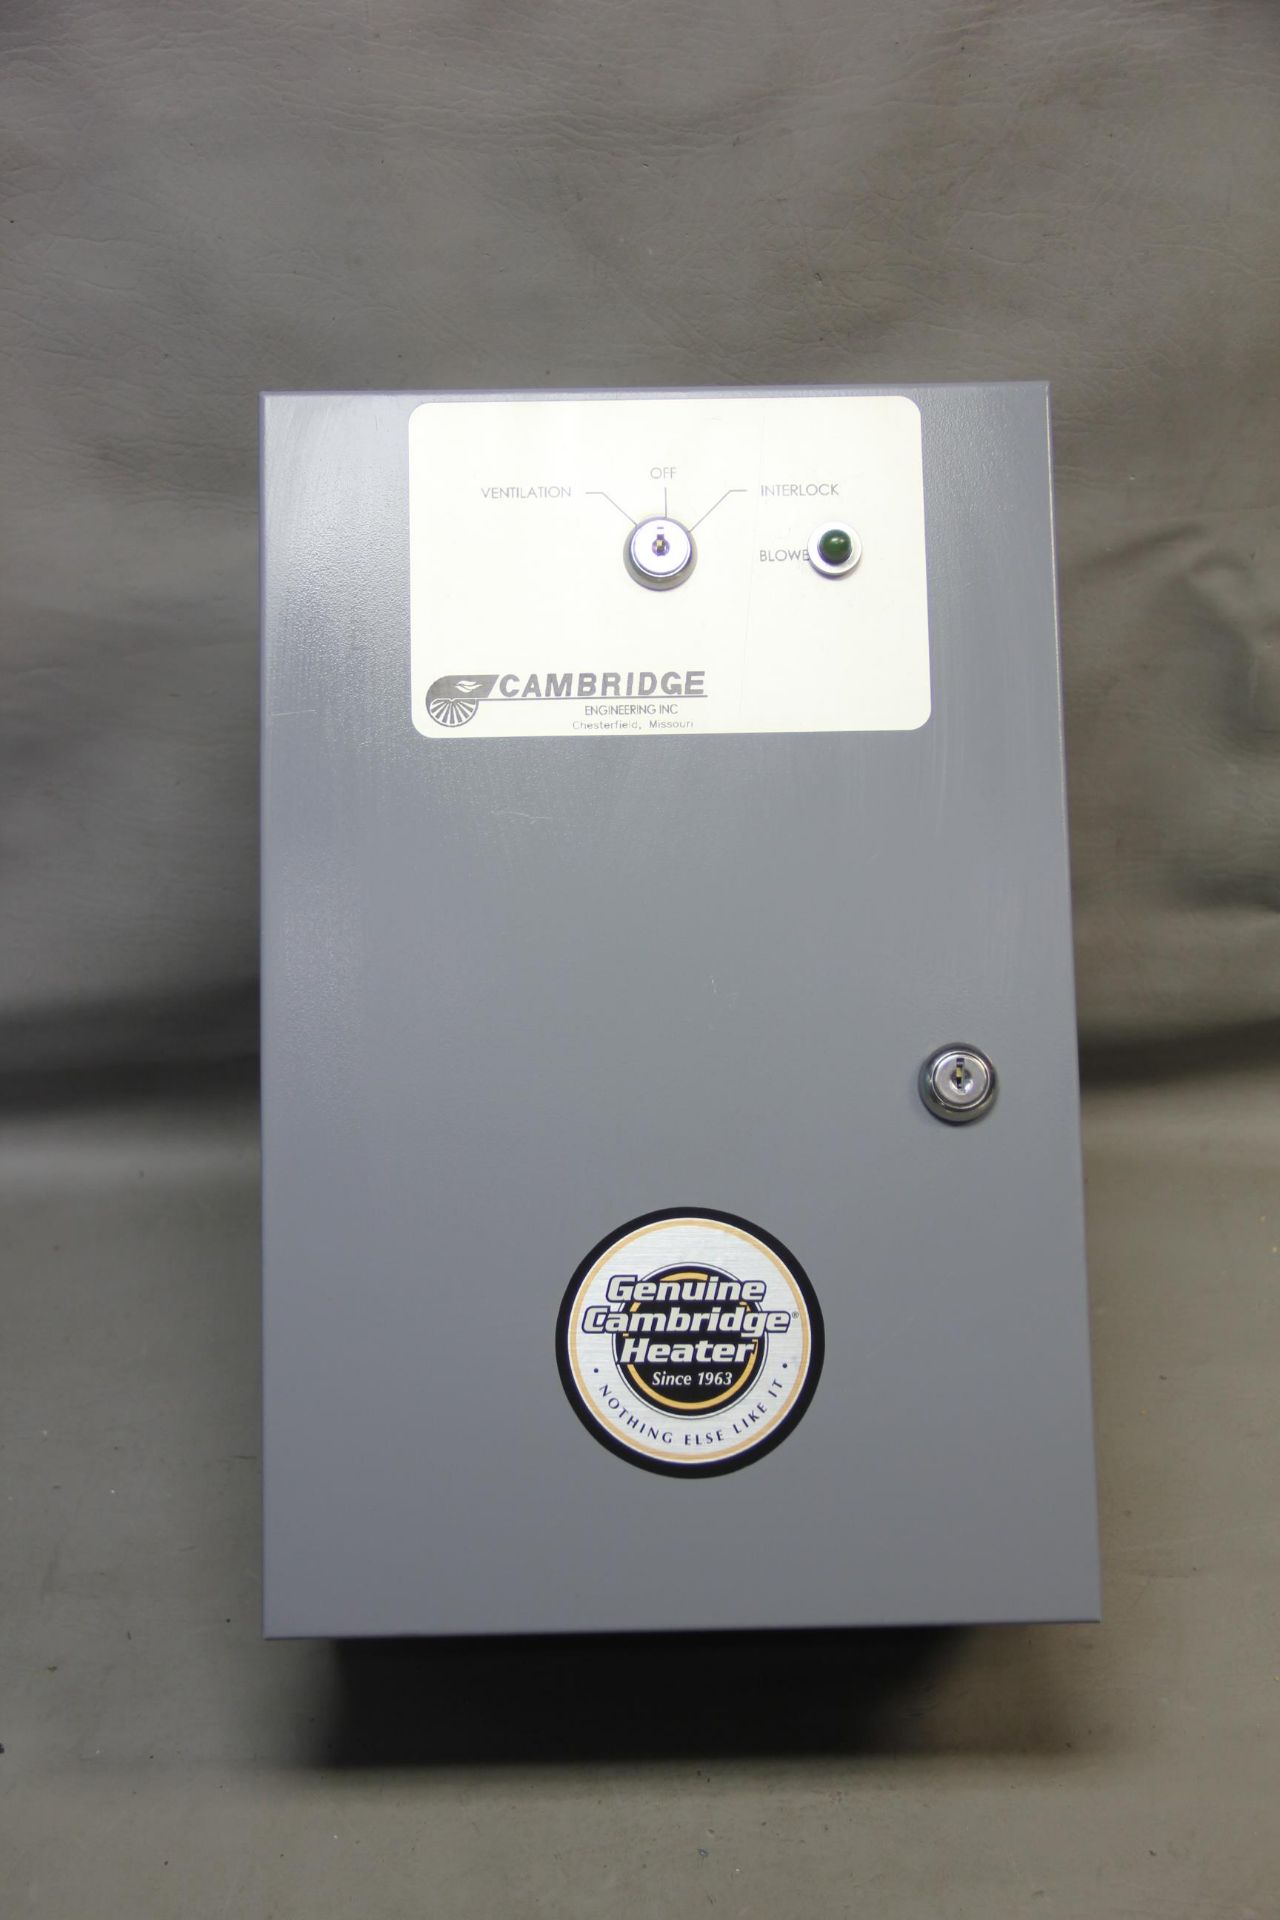 NEW CAMBRIDGE THERMOSTAT REMOTE STATION CONTROL IN ENCLOSURE - Image 2 of 10